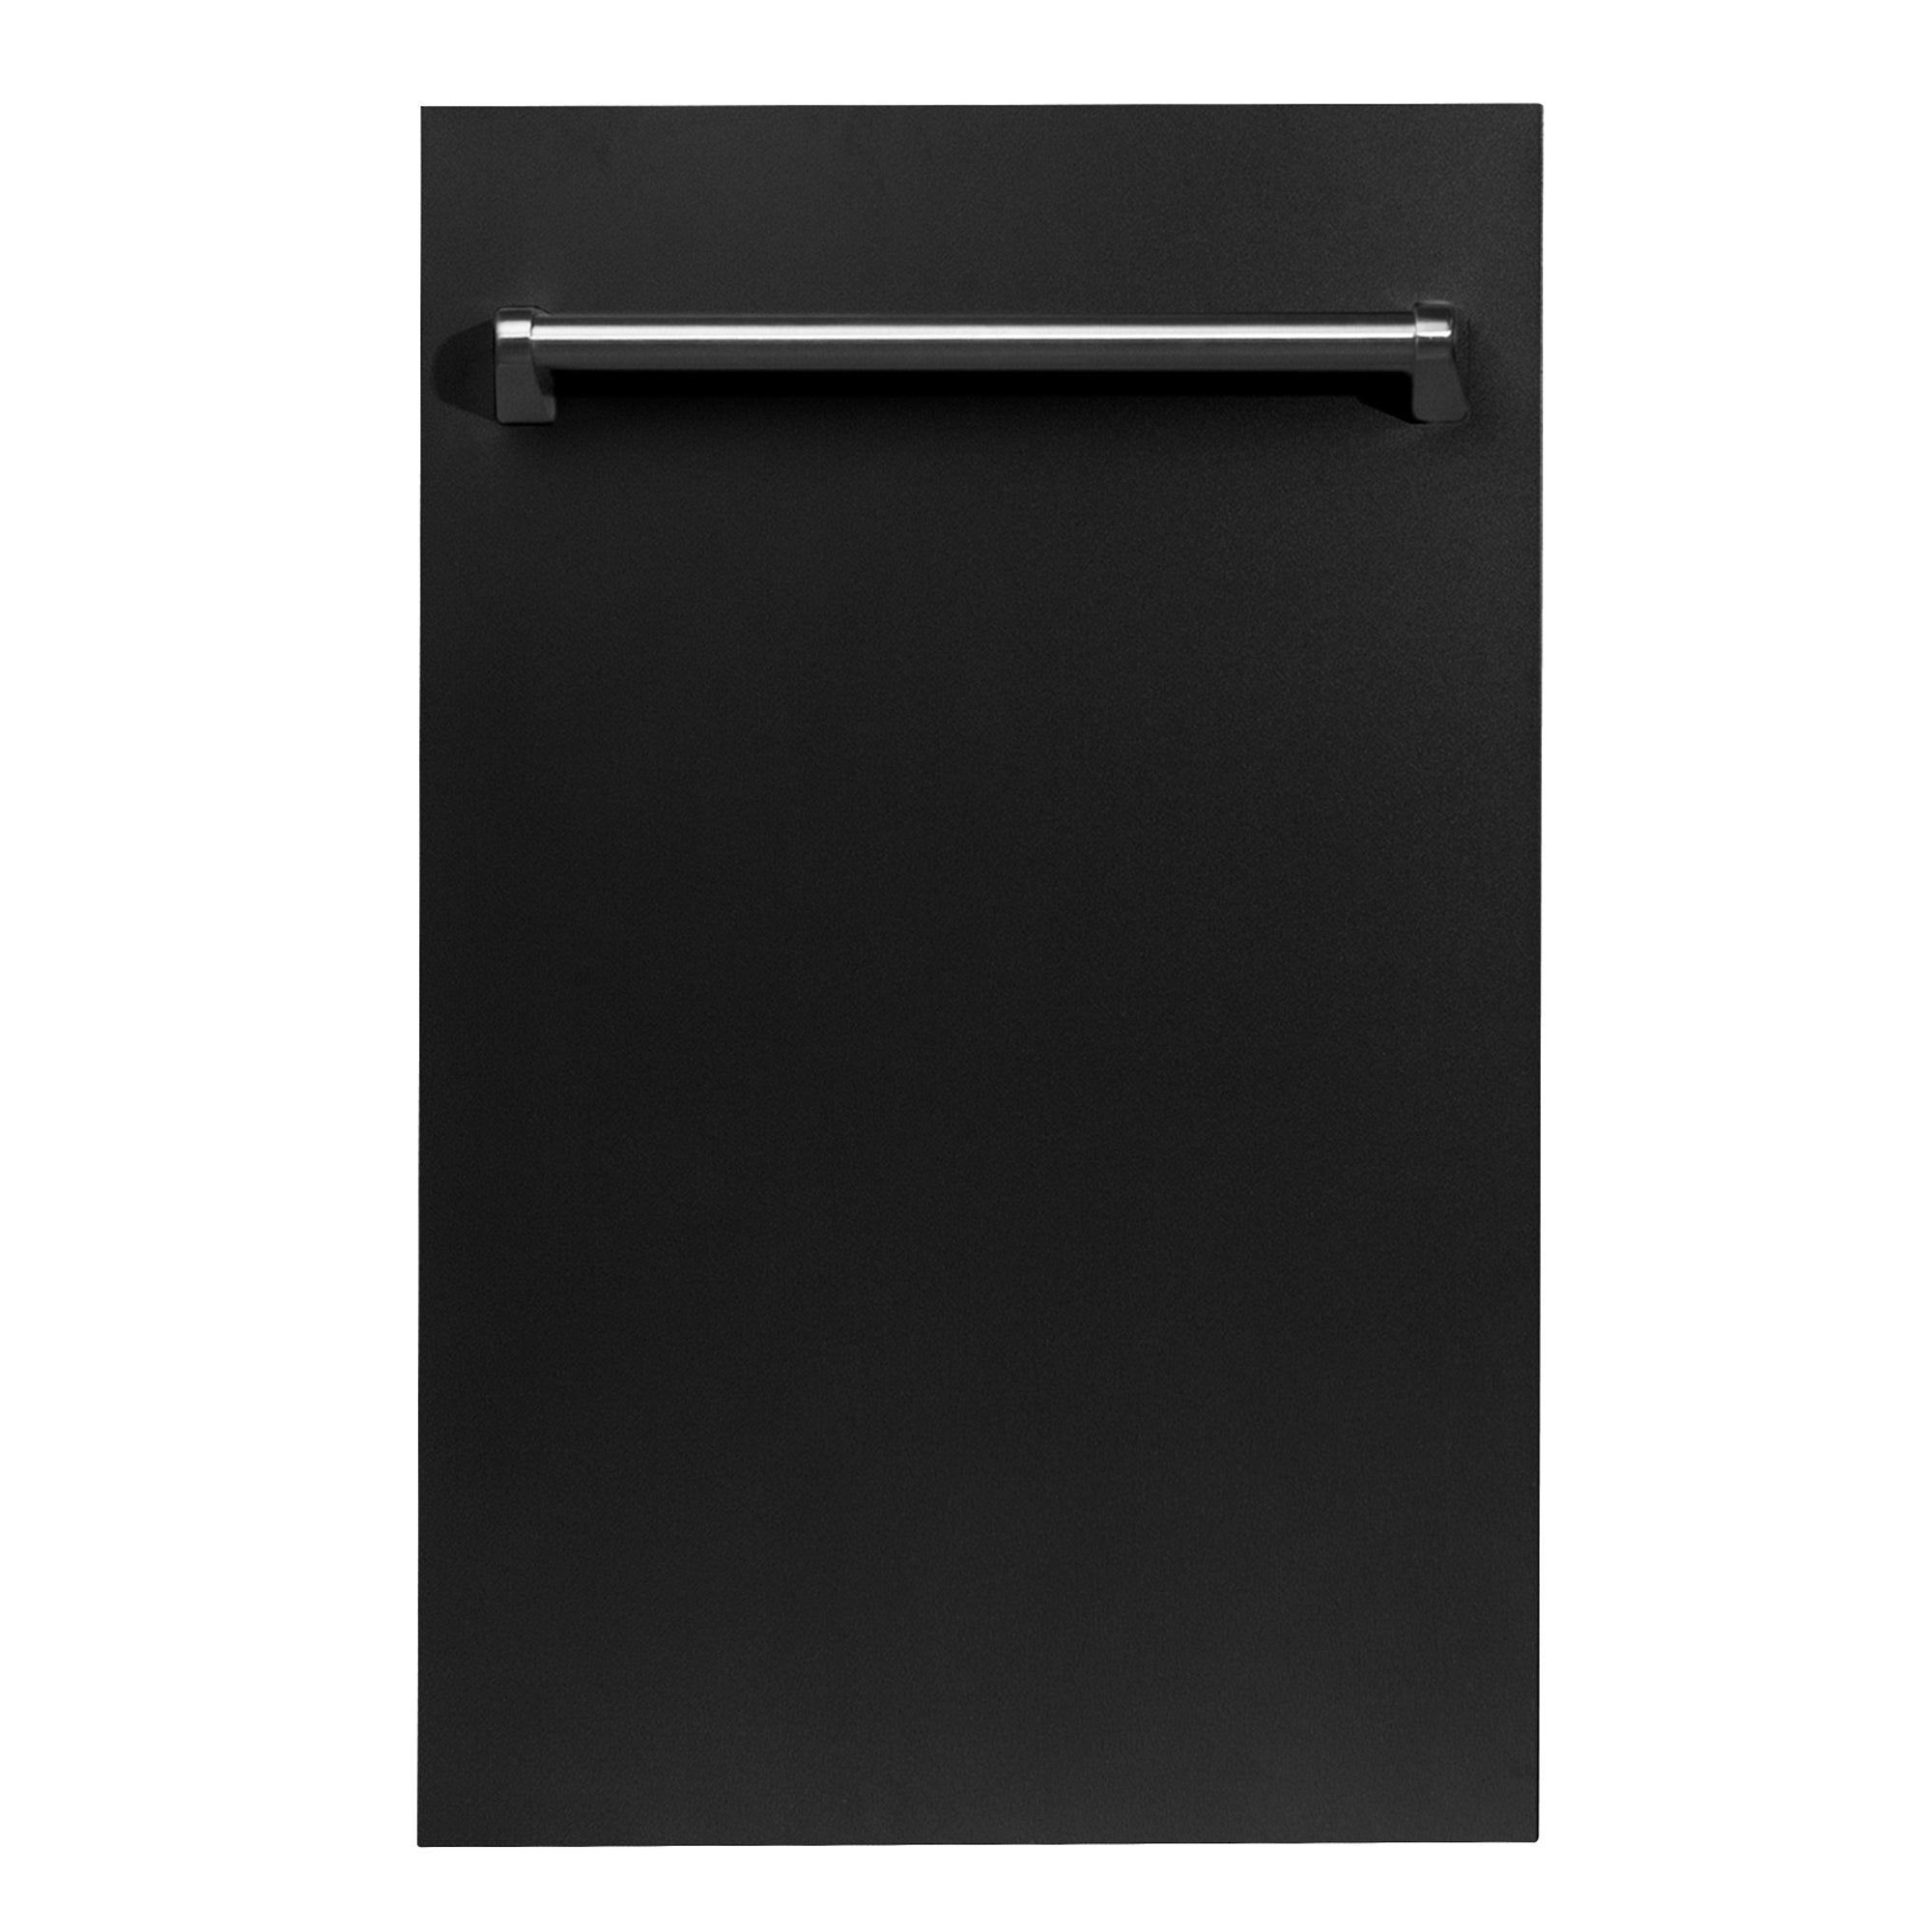 ZLINE 18 in. Compact Black Matte Top Control Built-In Dishwasher with Stainless Steel Tub and Traditional Style Handle, 52dBa